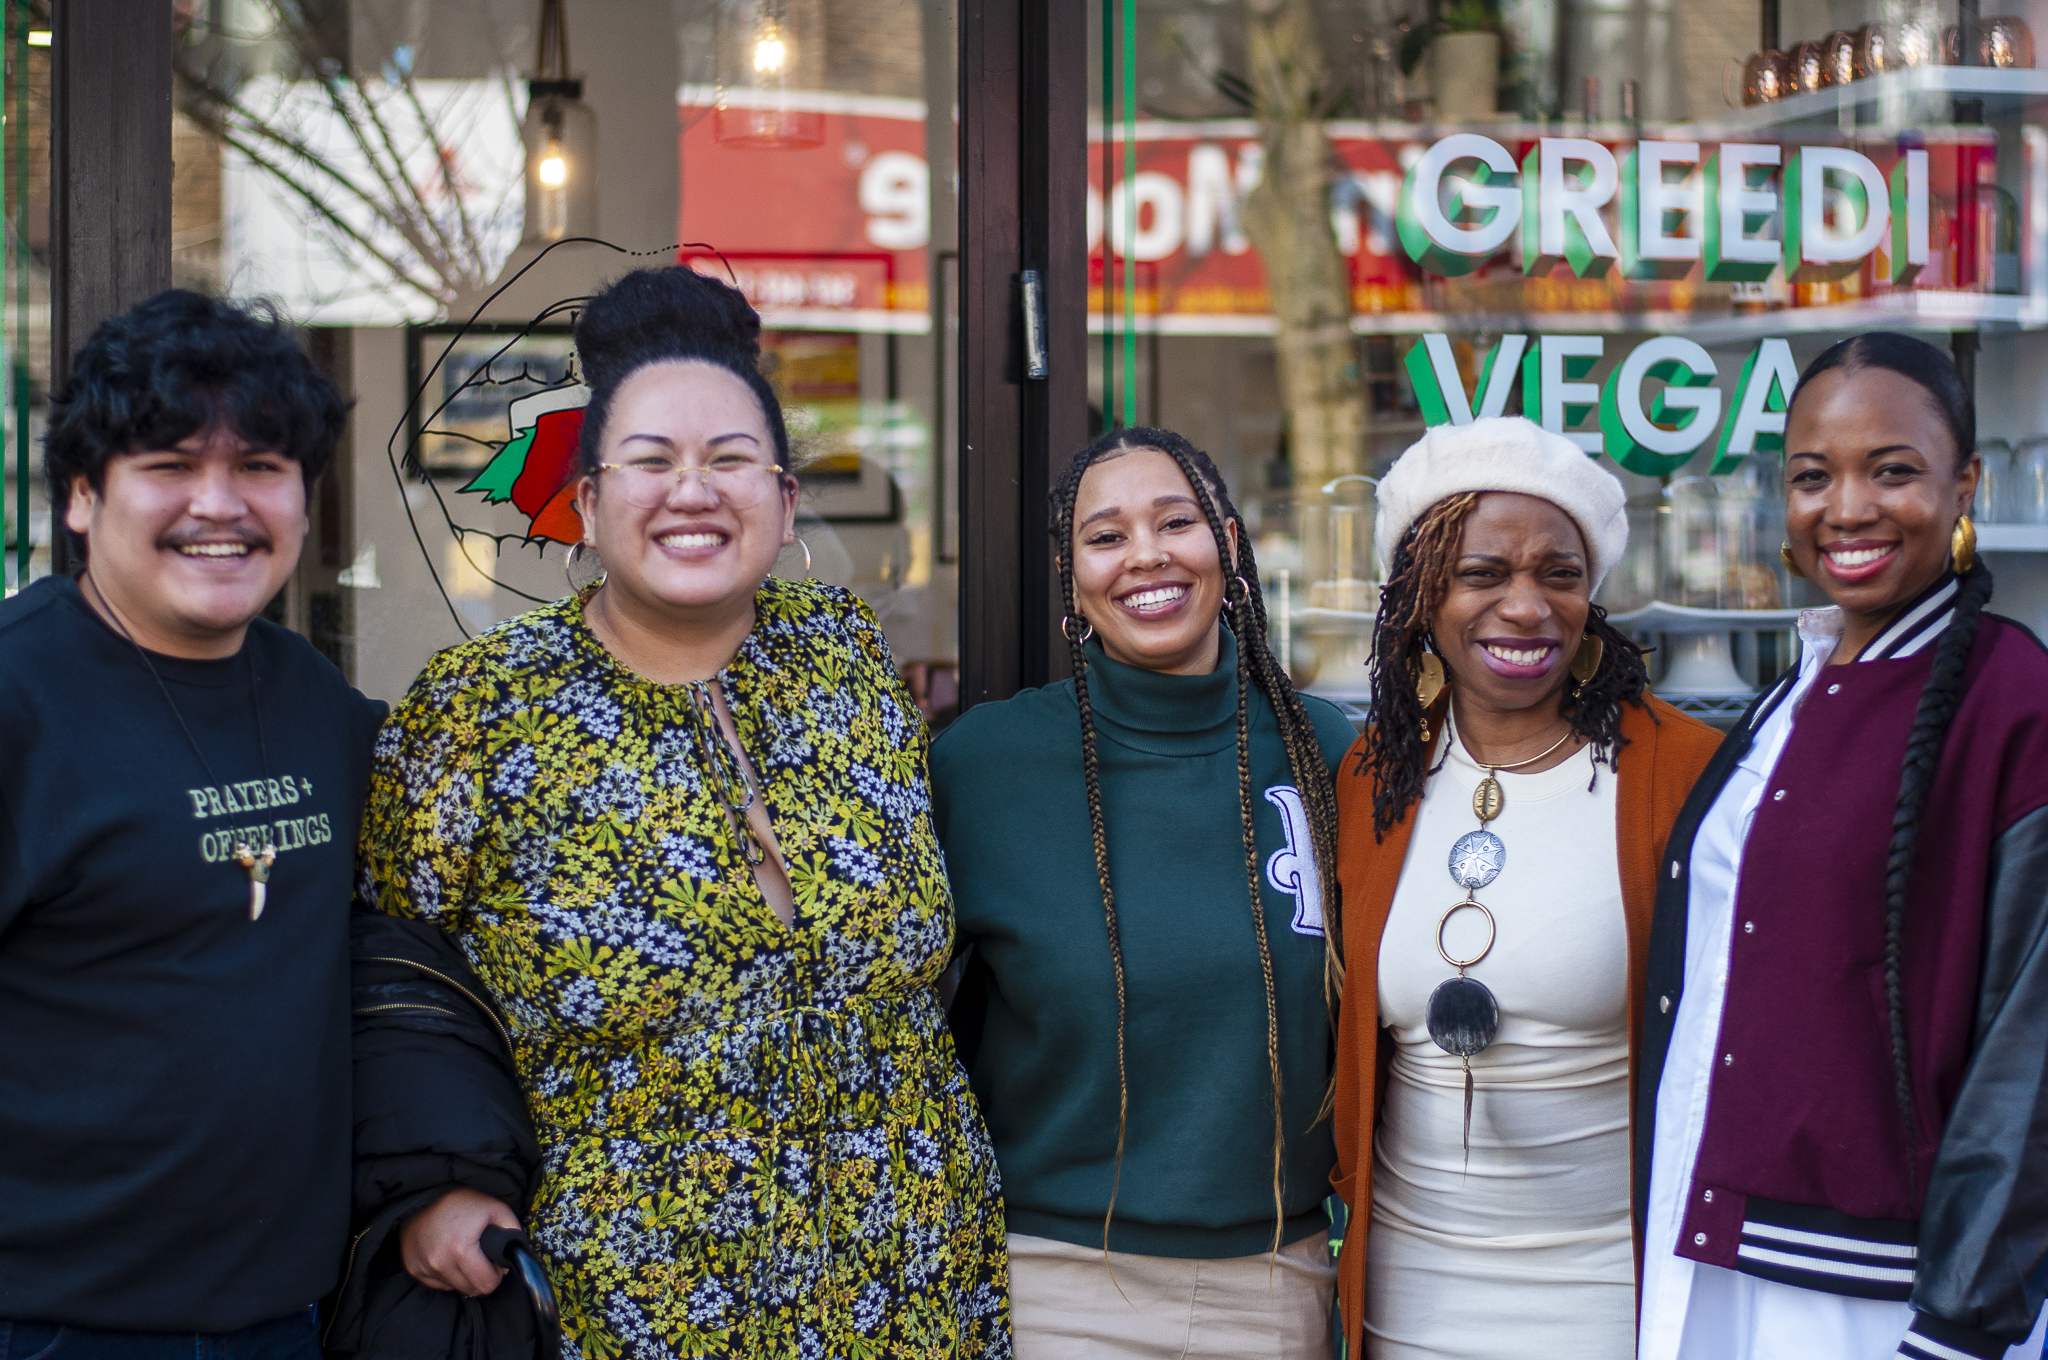 Four LP staff members from the Community Engagement team smile alongside The LP's Executive Director, Ayesha Williams, in front of Greedi Vegan Restaurant